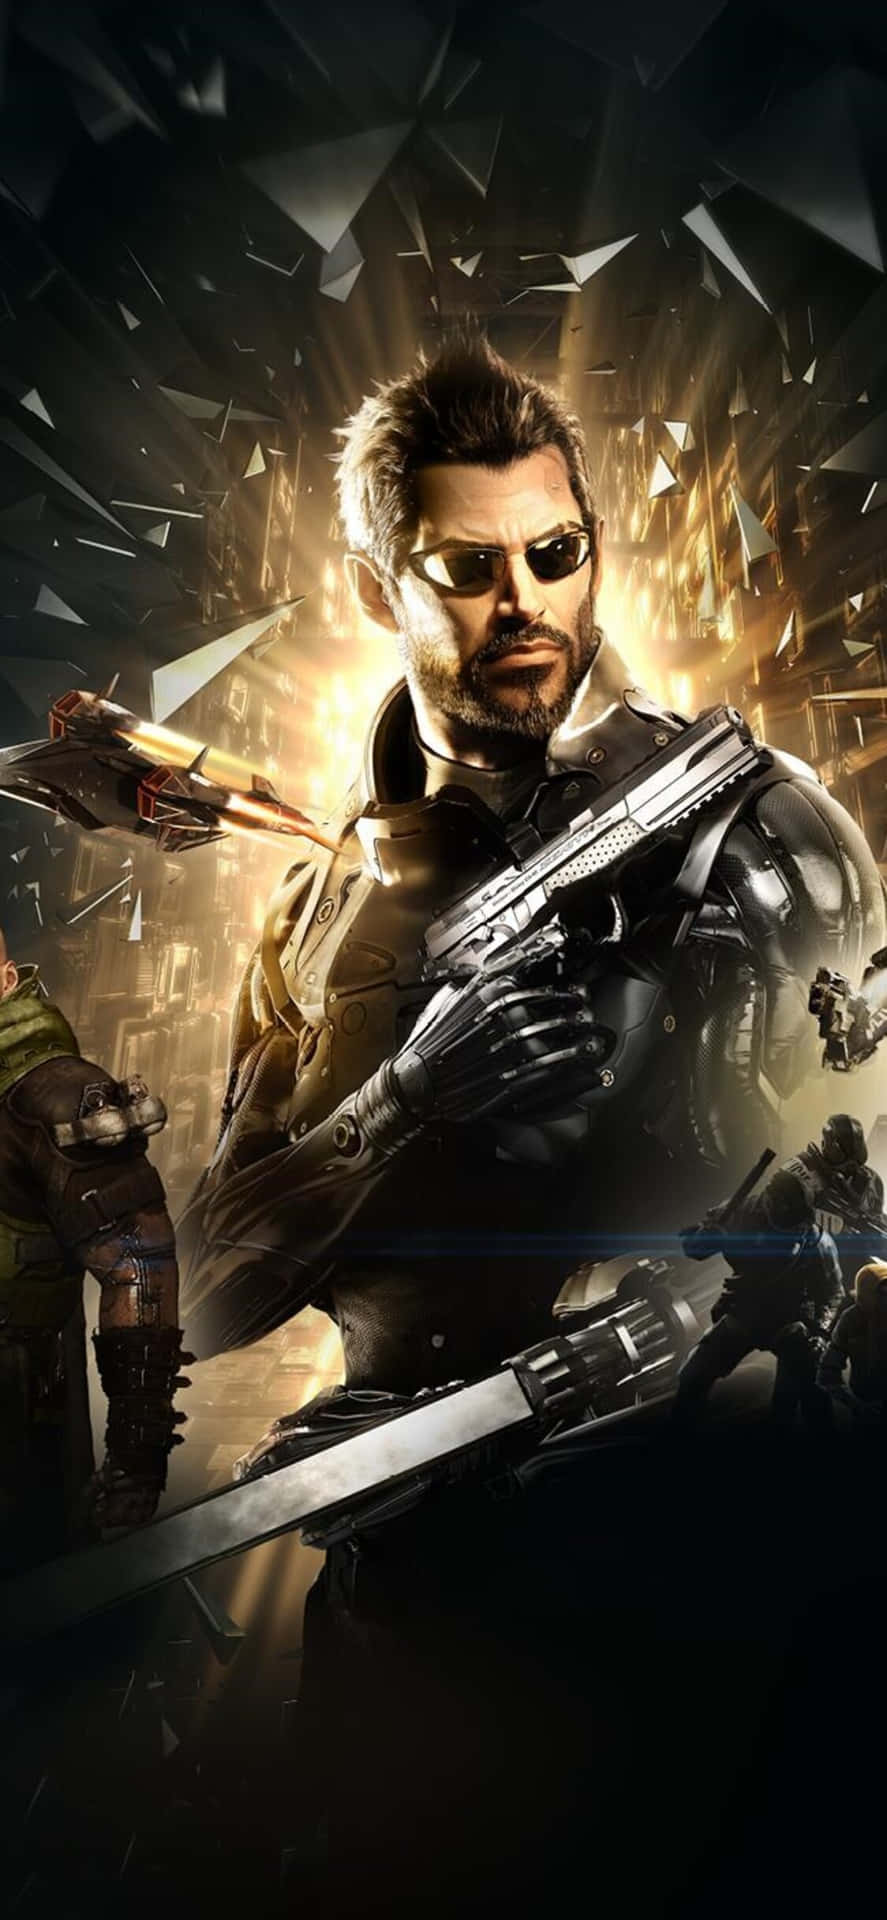 Experience the epic story of Android Deus Ex Mankind Divided